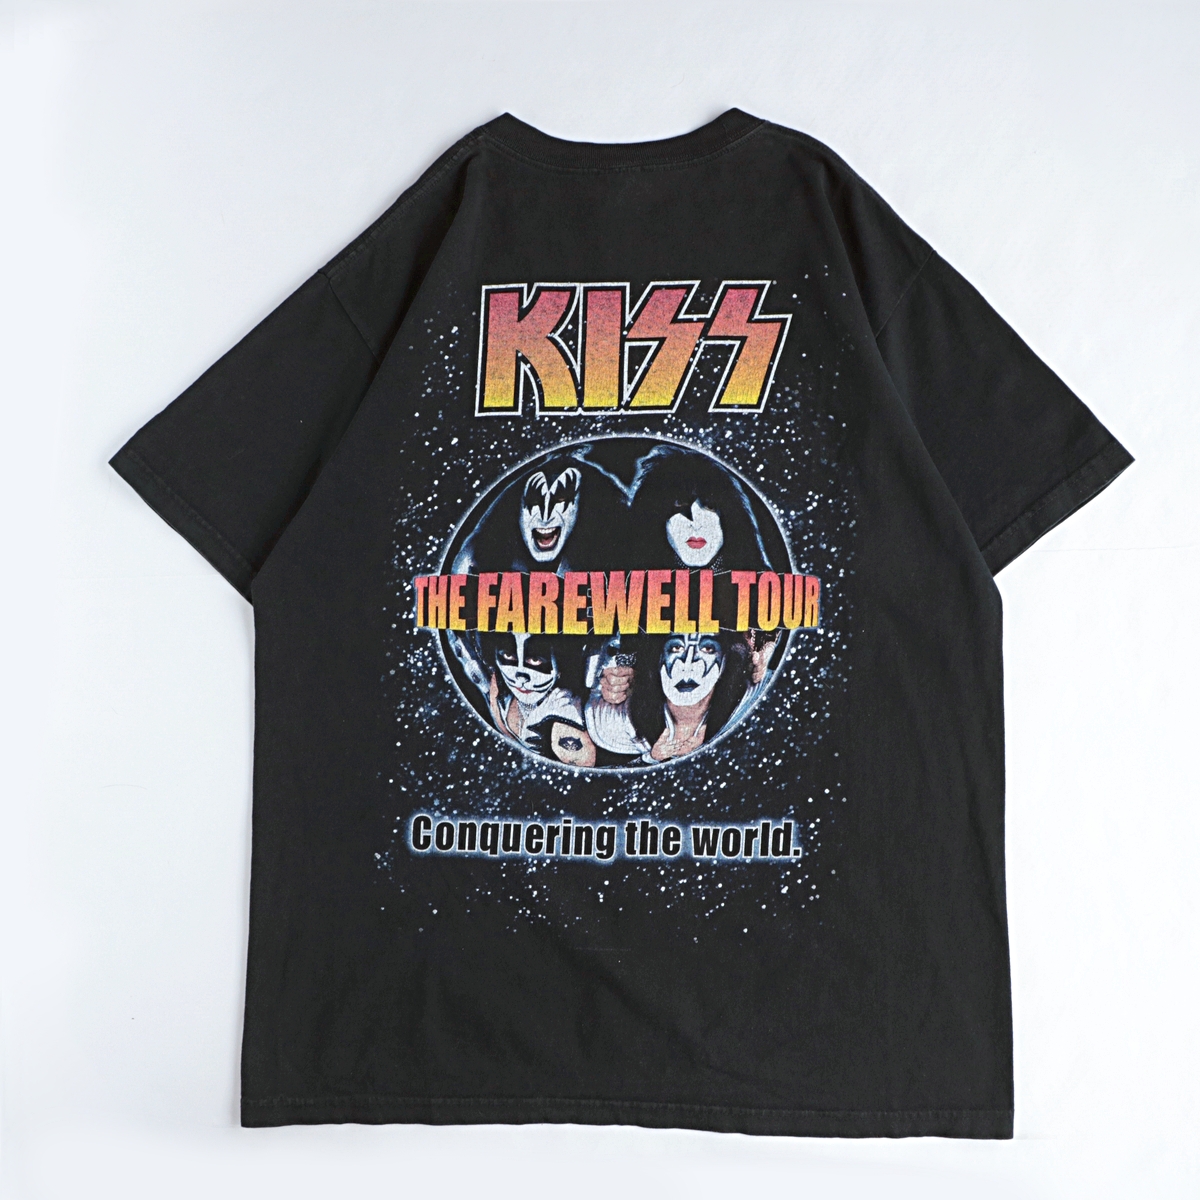 00s KISS “THE FAREWELL TOUR” バンド Tシャツ 古着 used – khaki select clothing｜古着 通販